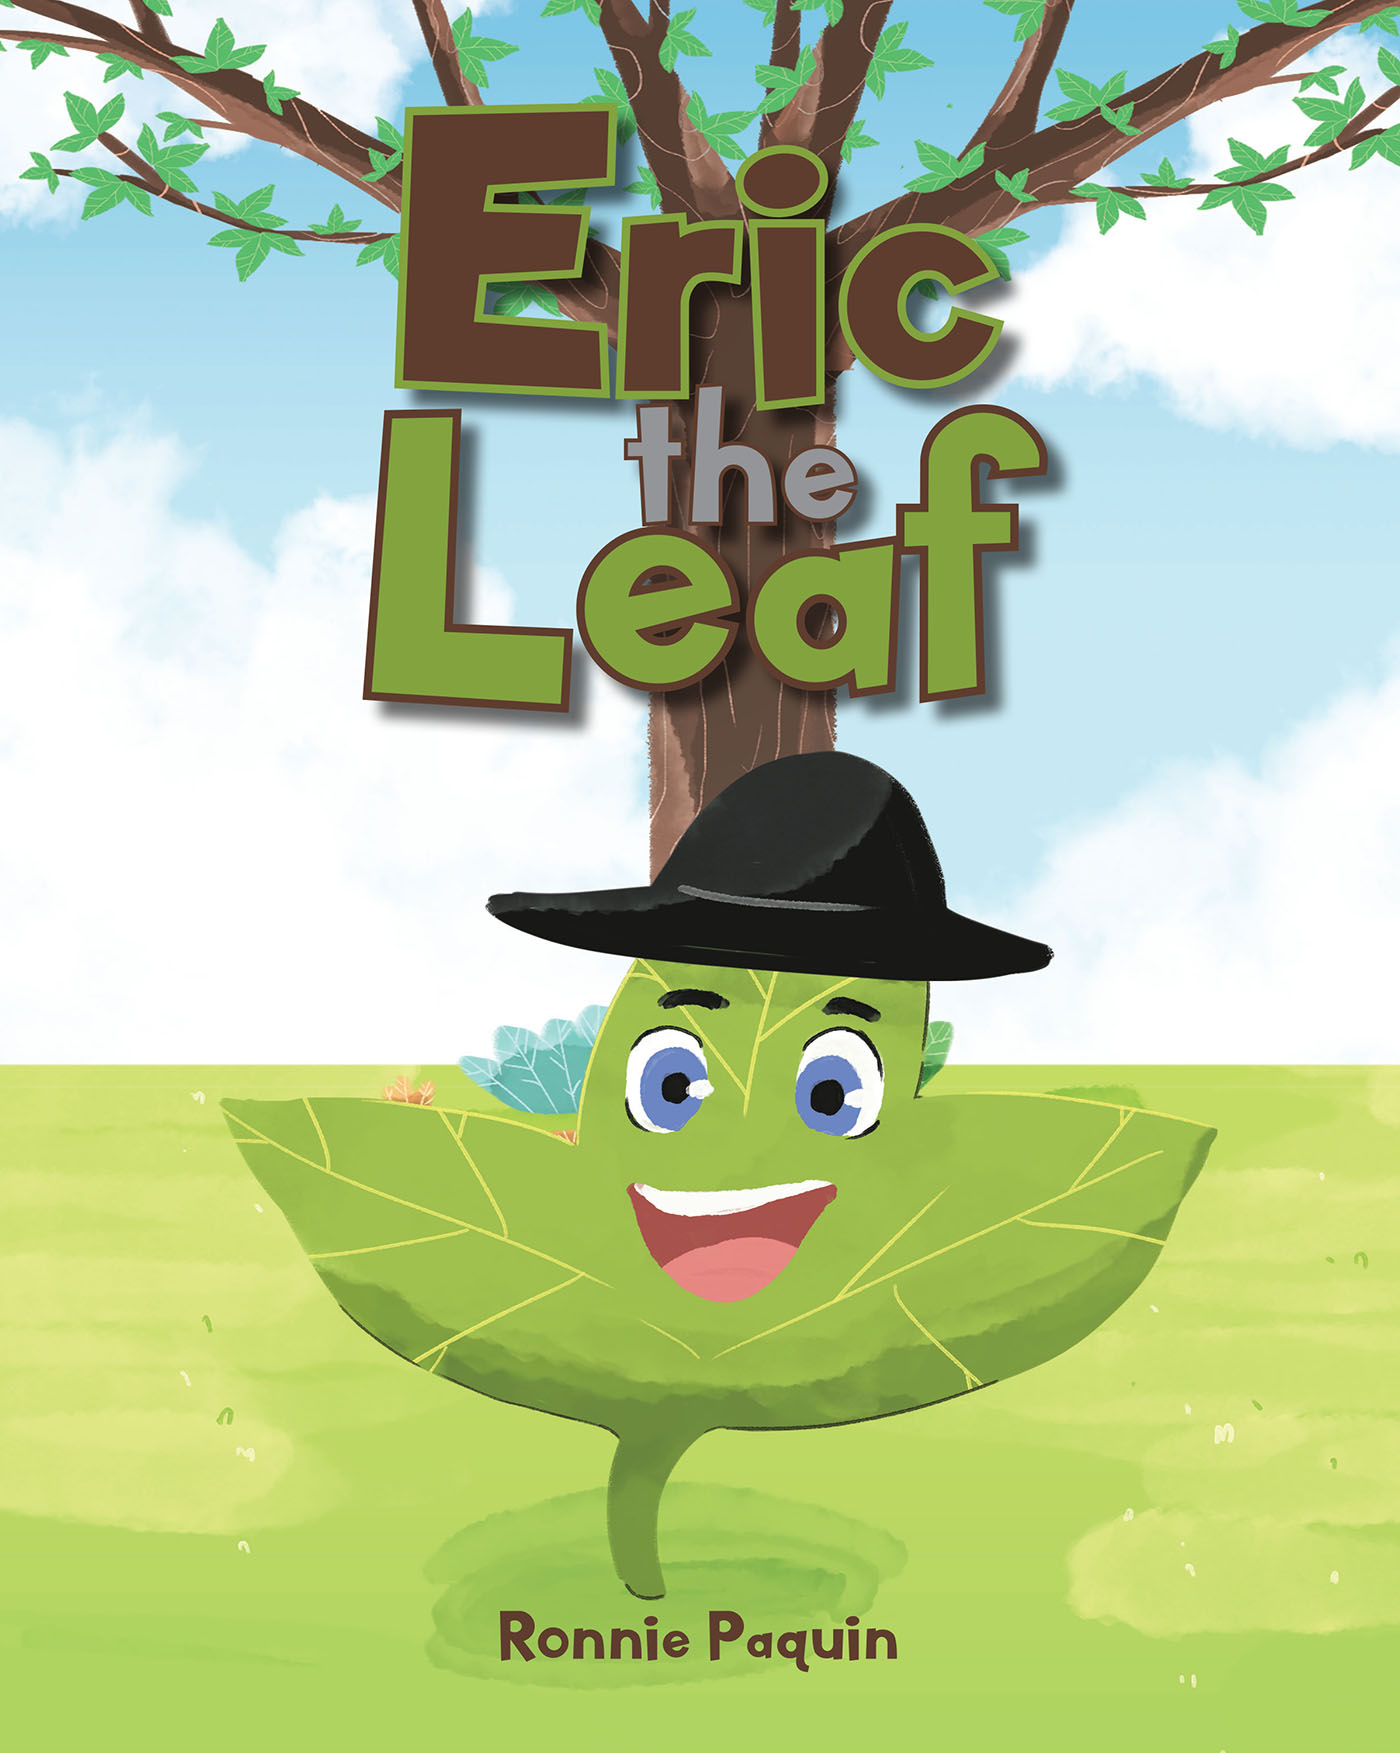 Author Ronnie Paquin’s New Book, "Eric the Leaf," is a Charming Story About a Young Leaf Who Gets Blown Around by the Wind and is Sent Off on an Adventure